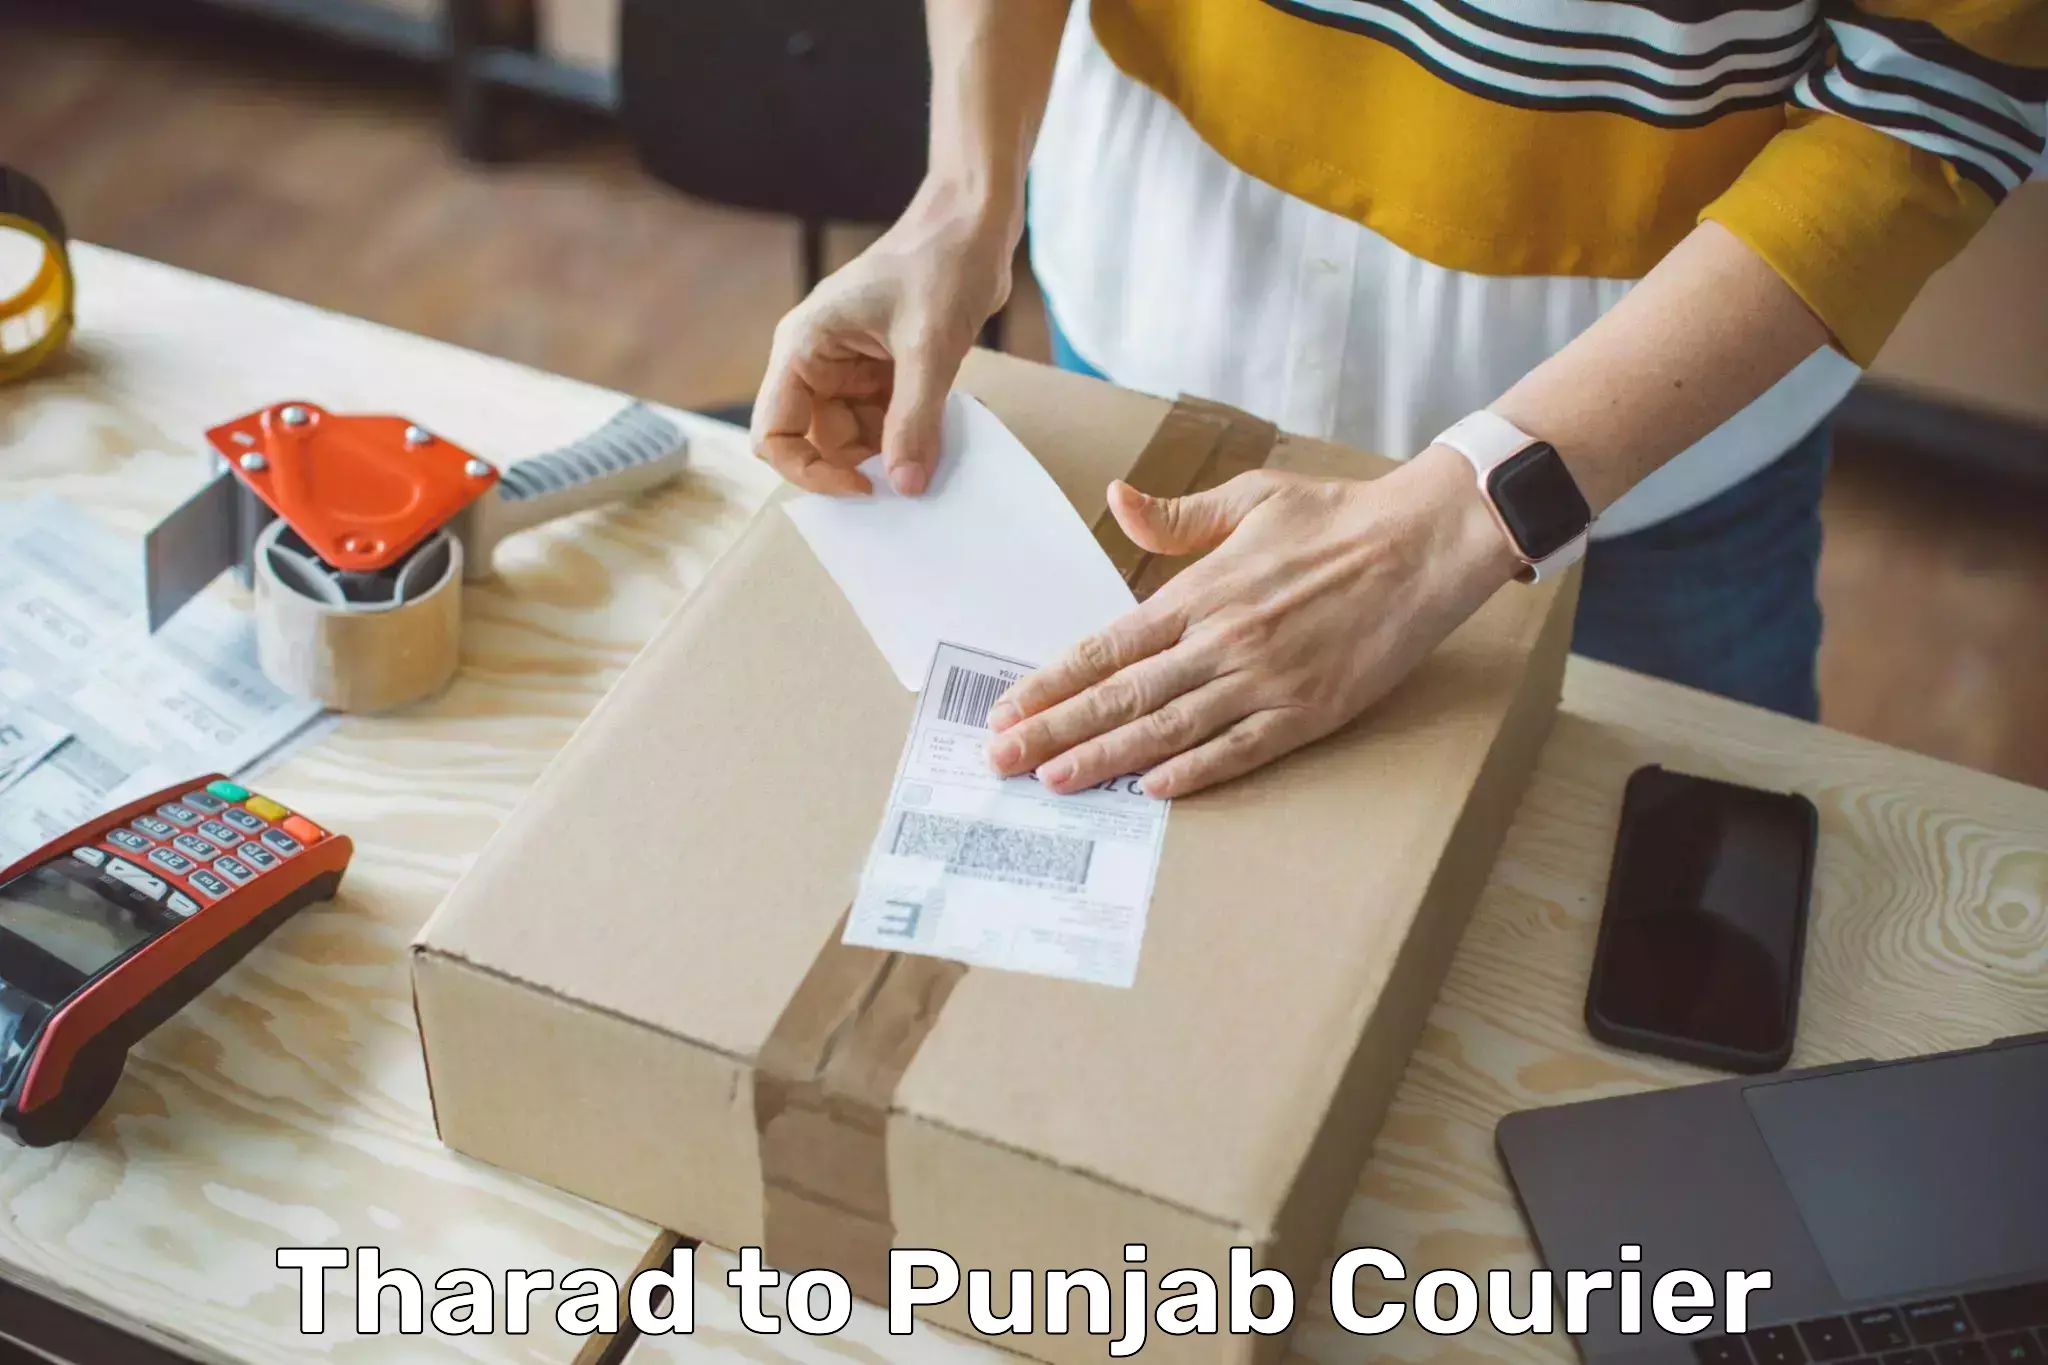 Efficient order fulfillment in Tharad to Patiala